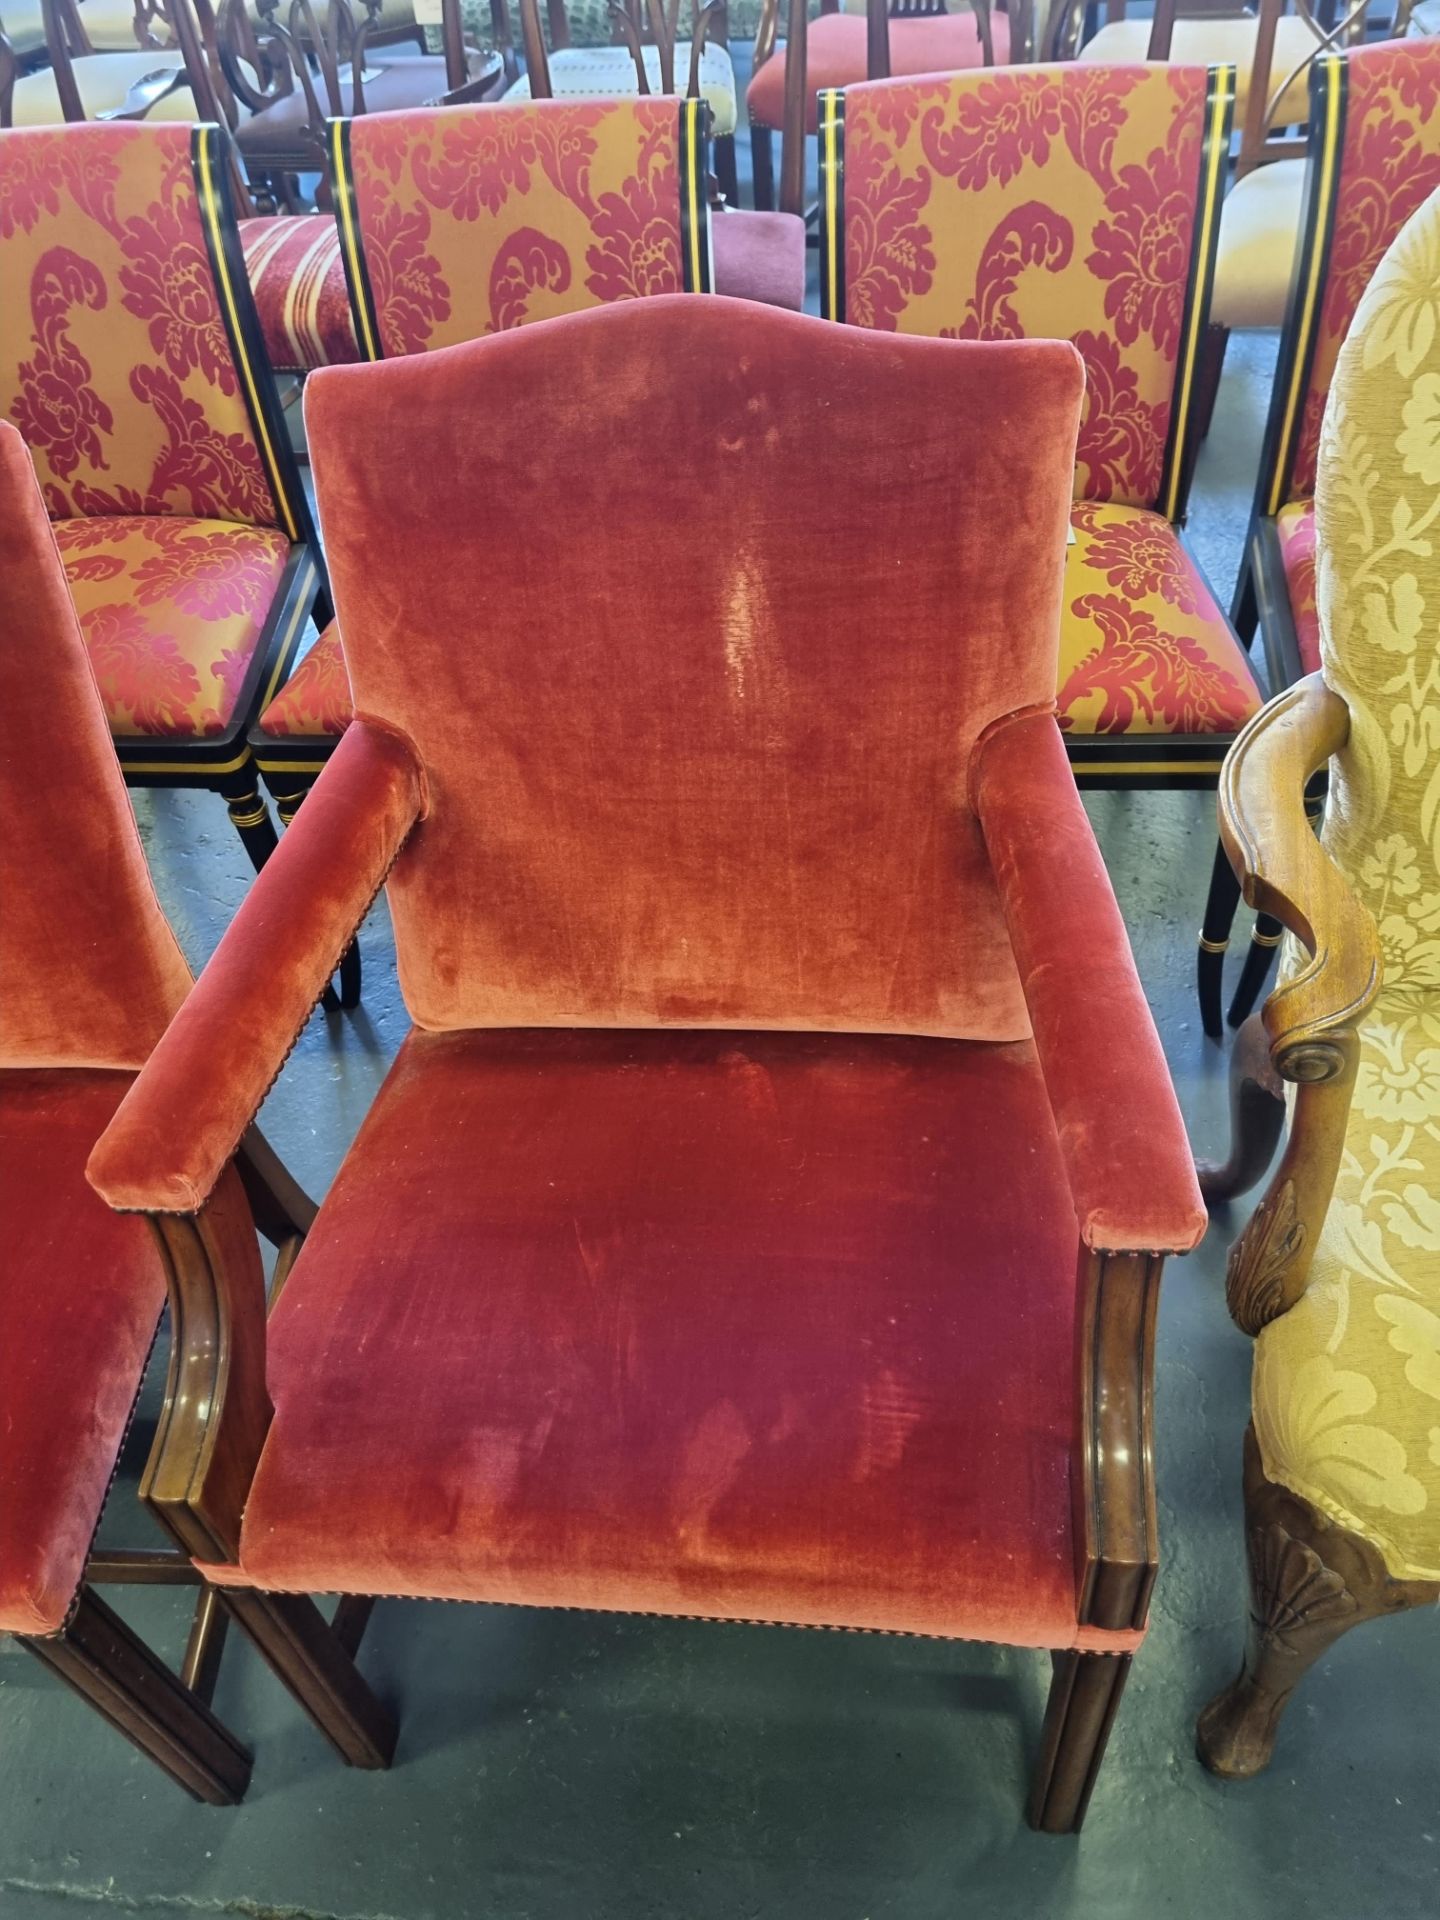 2 X Arthur Brett Mahogany Studded Upholstered Chairs Comprising Of 1 X Arm With Upholstered Back, - Image 2 of 2